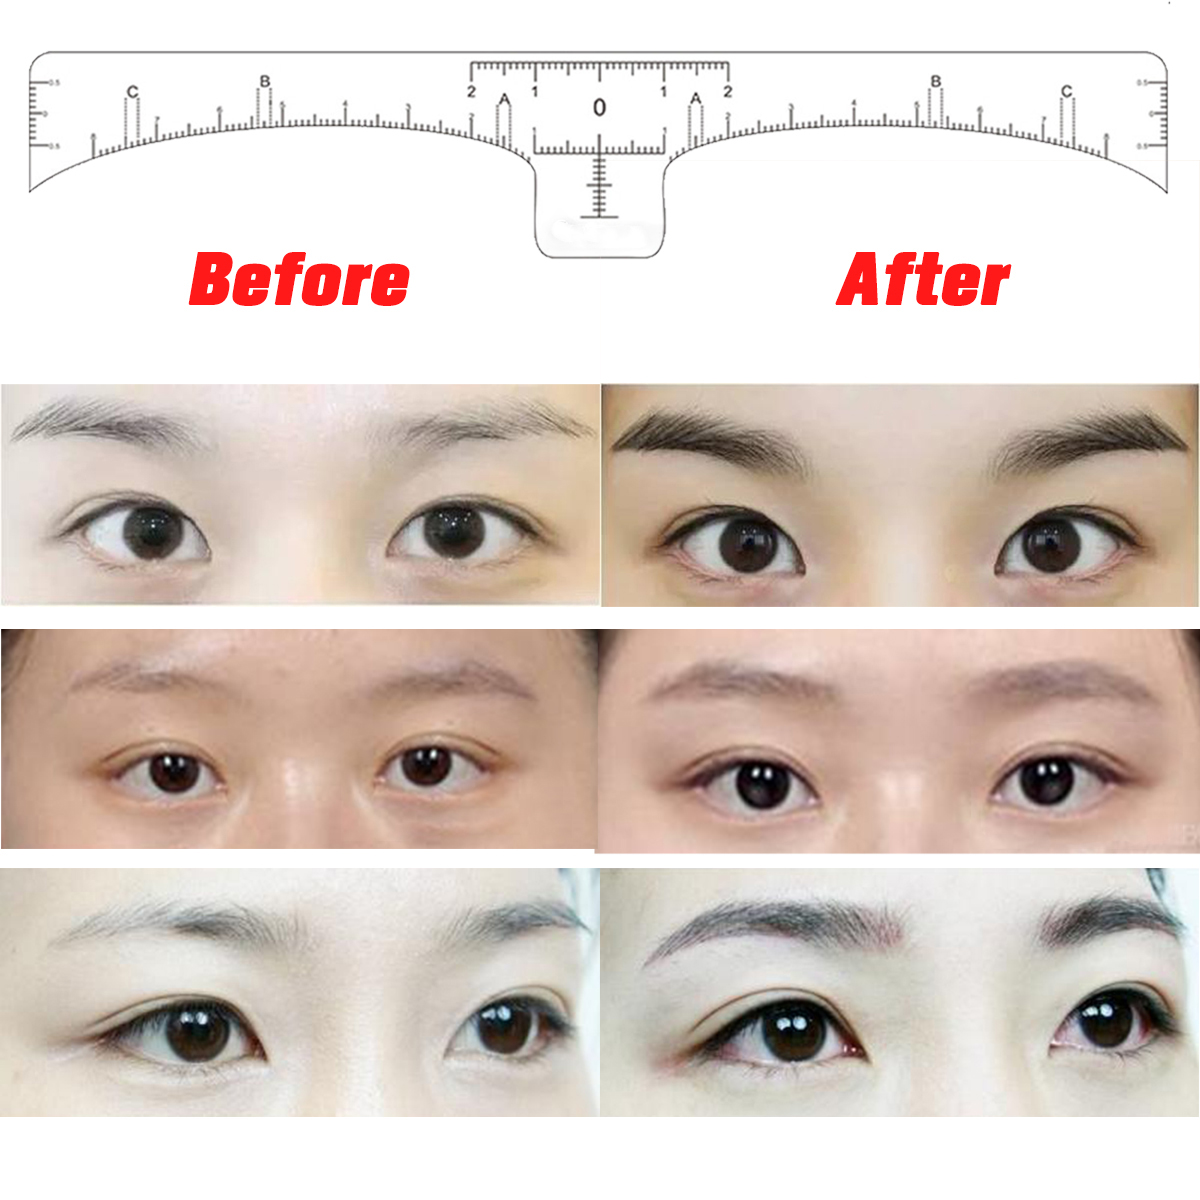 100PCS-Eyebrow-Stencil-One-time-Eyebrow-Grooming-Stencil-Measure-Ruler-Brow-Shaper-Makeup-Shaping-To-1940017-9